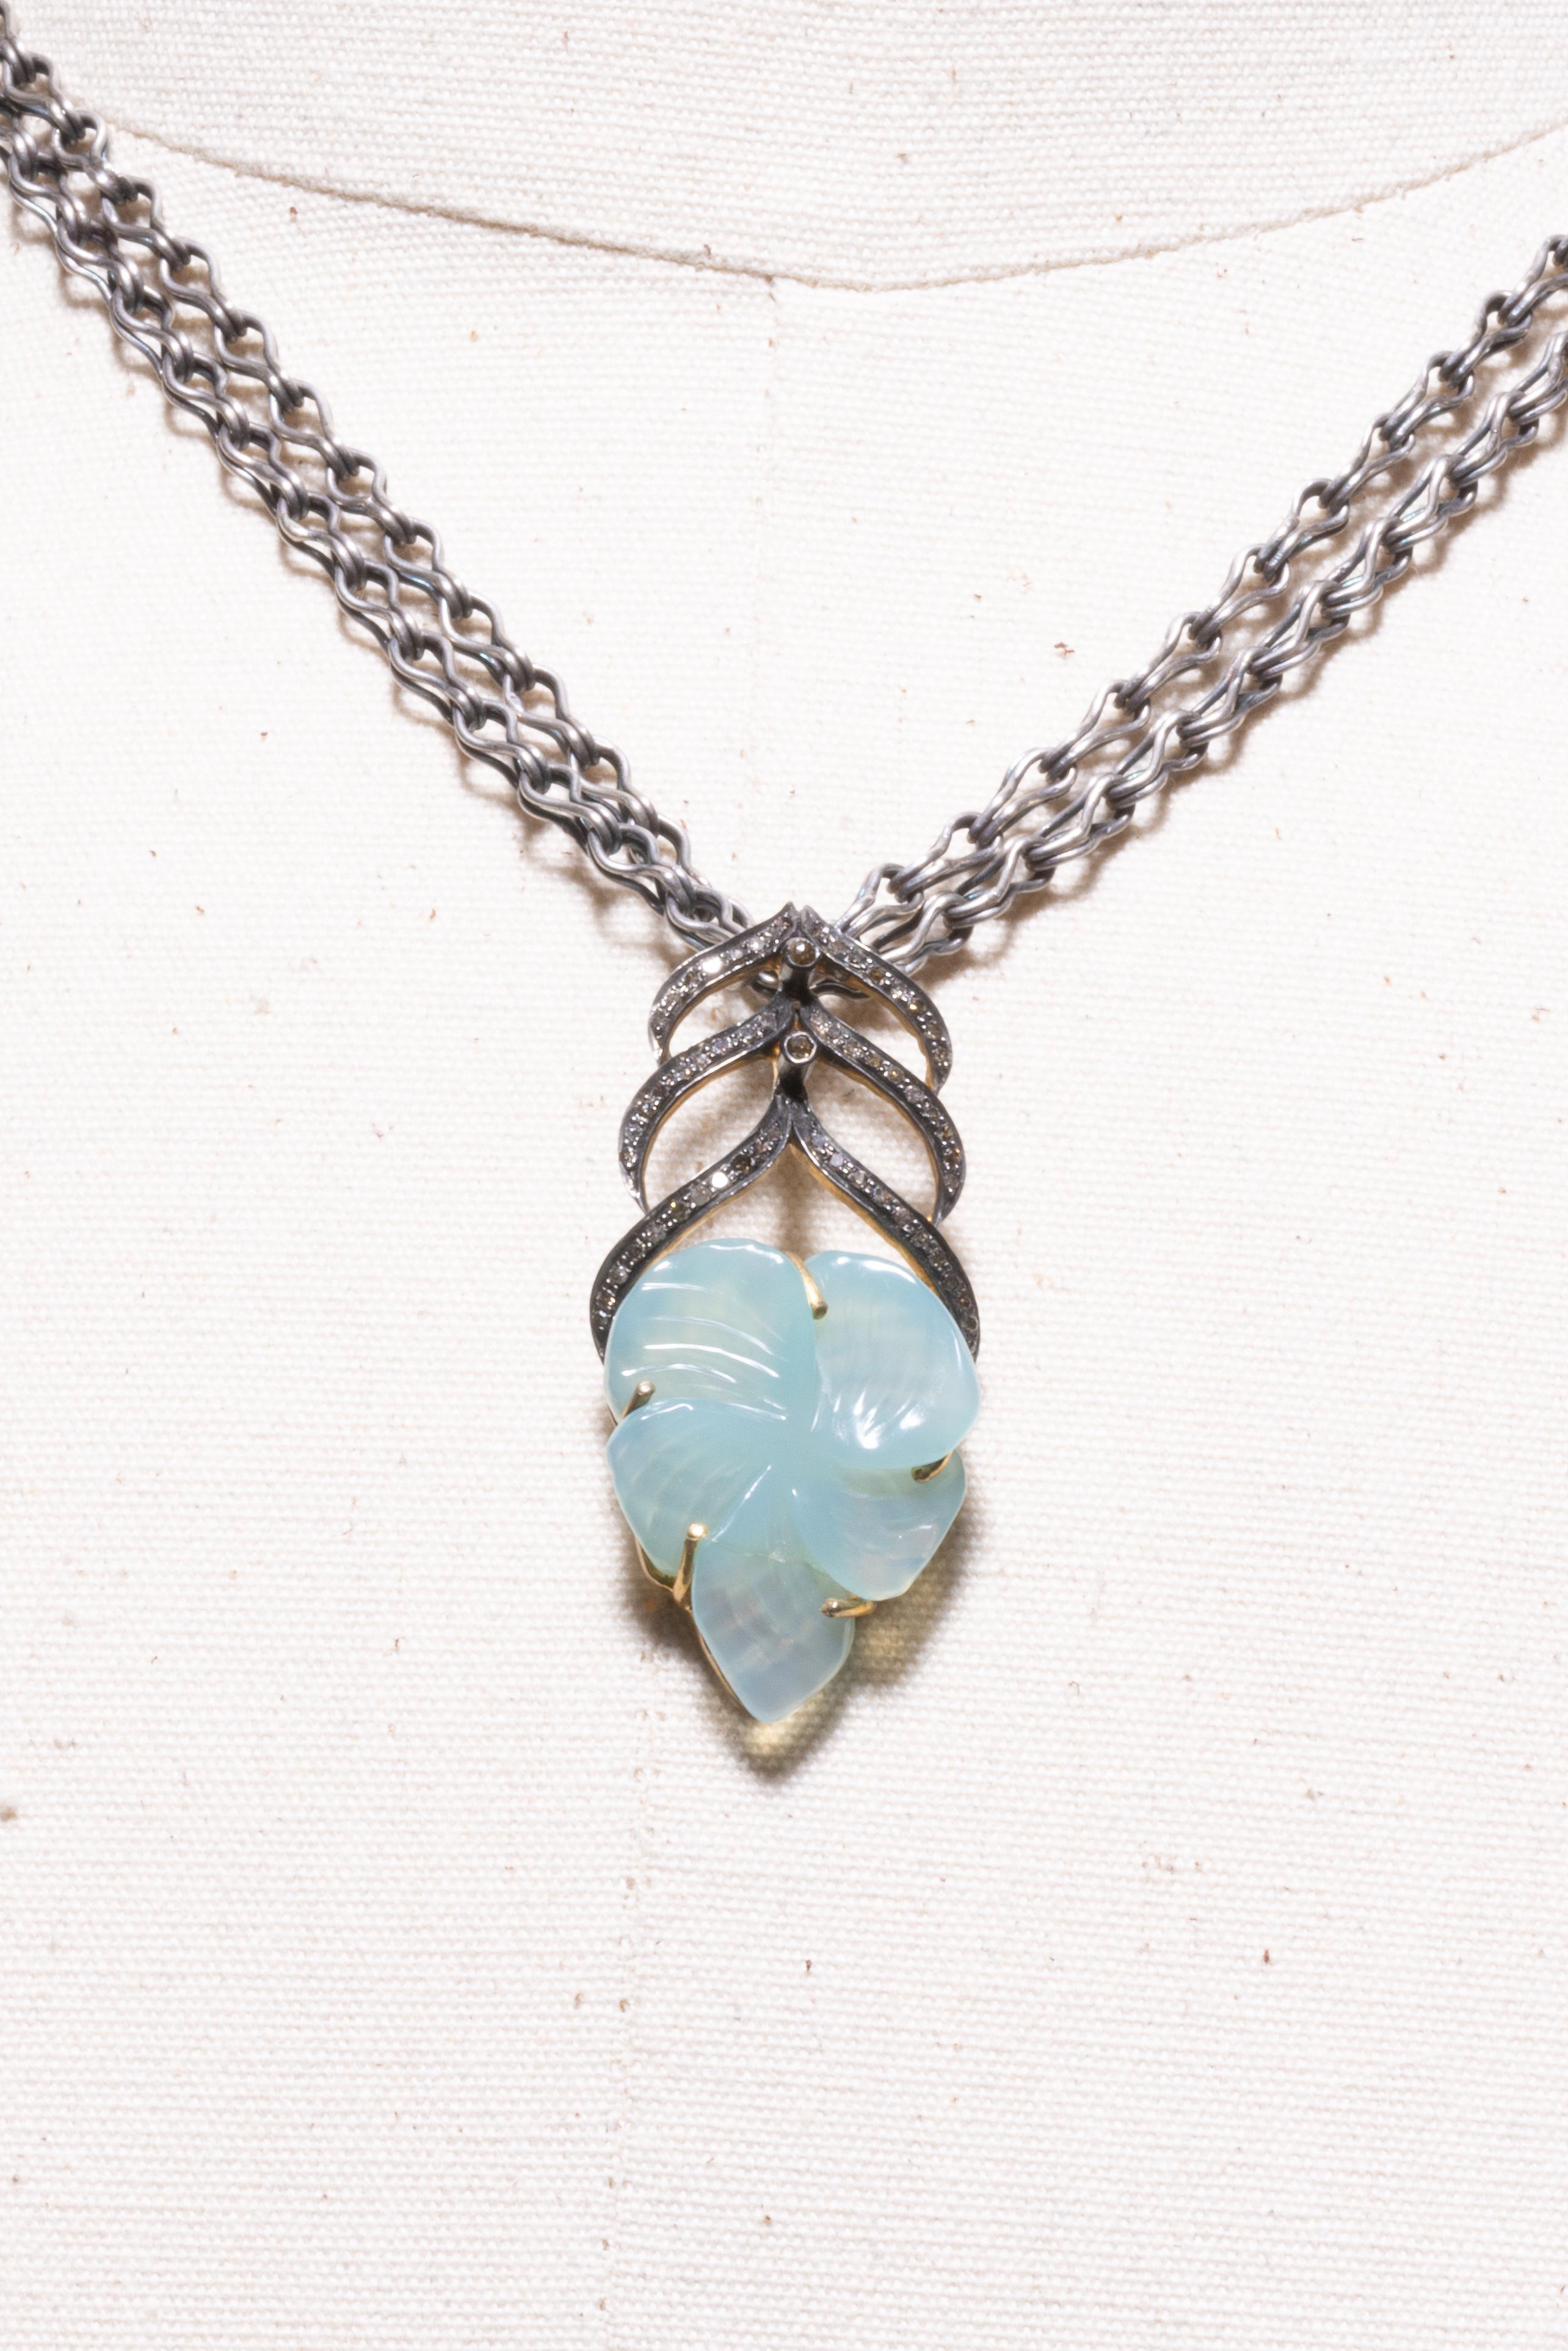 Carved floral chalcedony pendant with pave` set diamonds set in oxidized sterling silver on a hand woven sterling silver snake chain.  Diamond weight is 1.47 carats and chalcedony is 16 carats.  Pendant drop is 2 inches.  The chain can be doubled to